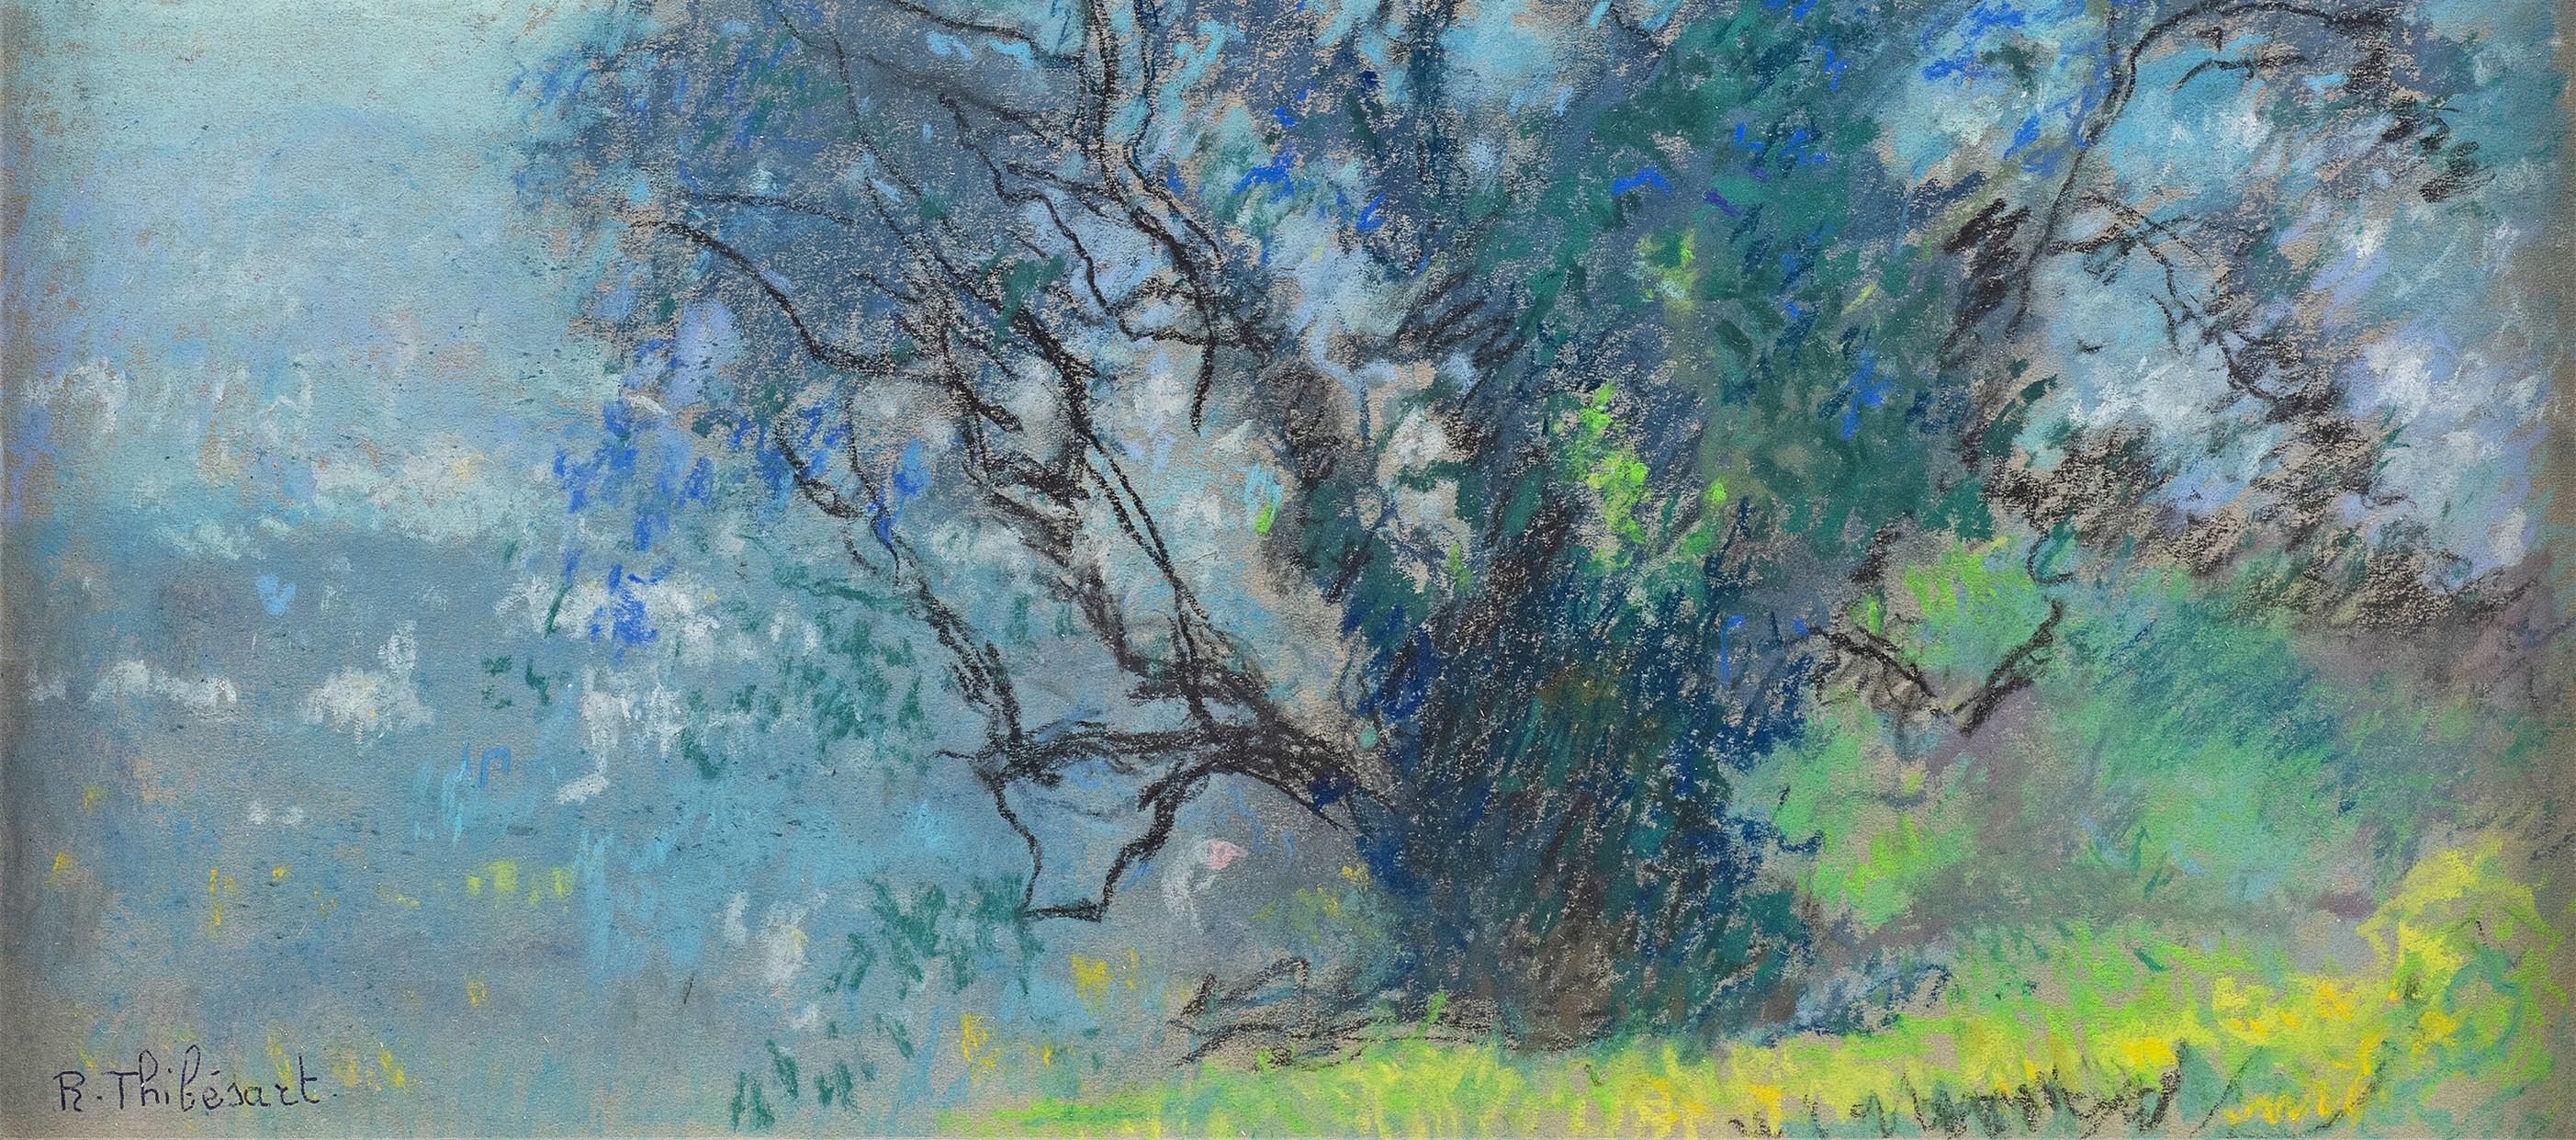 Light Through the Trees (Lumière à Travers l'Arbre)
Raymond Thibesart (France, 1874-1968)
Pastel on paper, circa 1920s
Signed l.l.
12.5 x 9.5 (13/4  x 16 3/4  framed) inches

Raymond Thibesart was born into an affluent family on May 2nd, 1874. As a